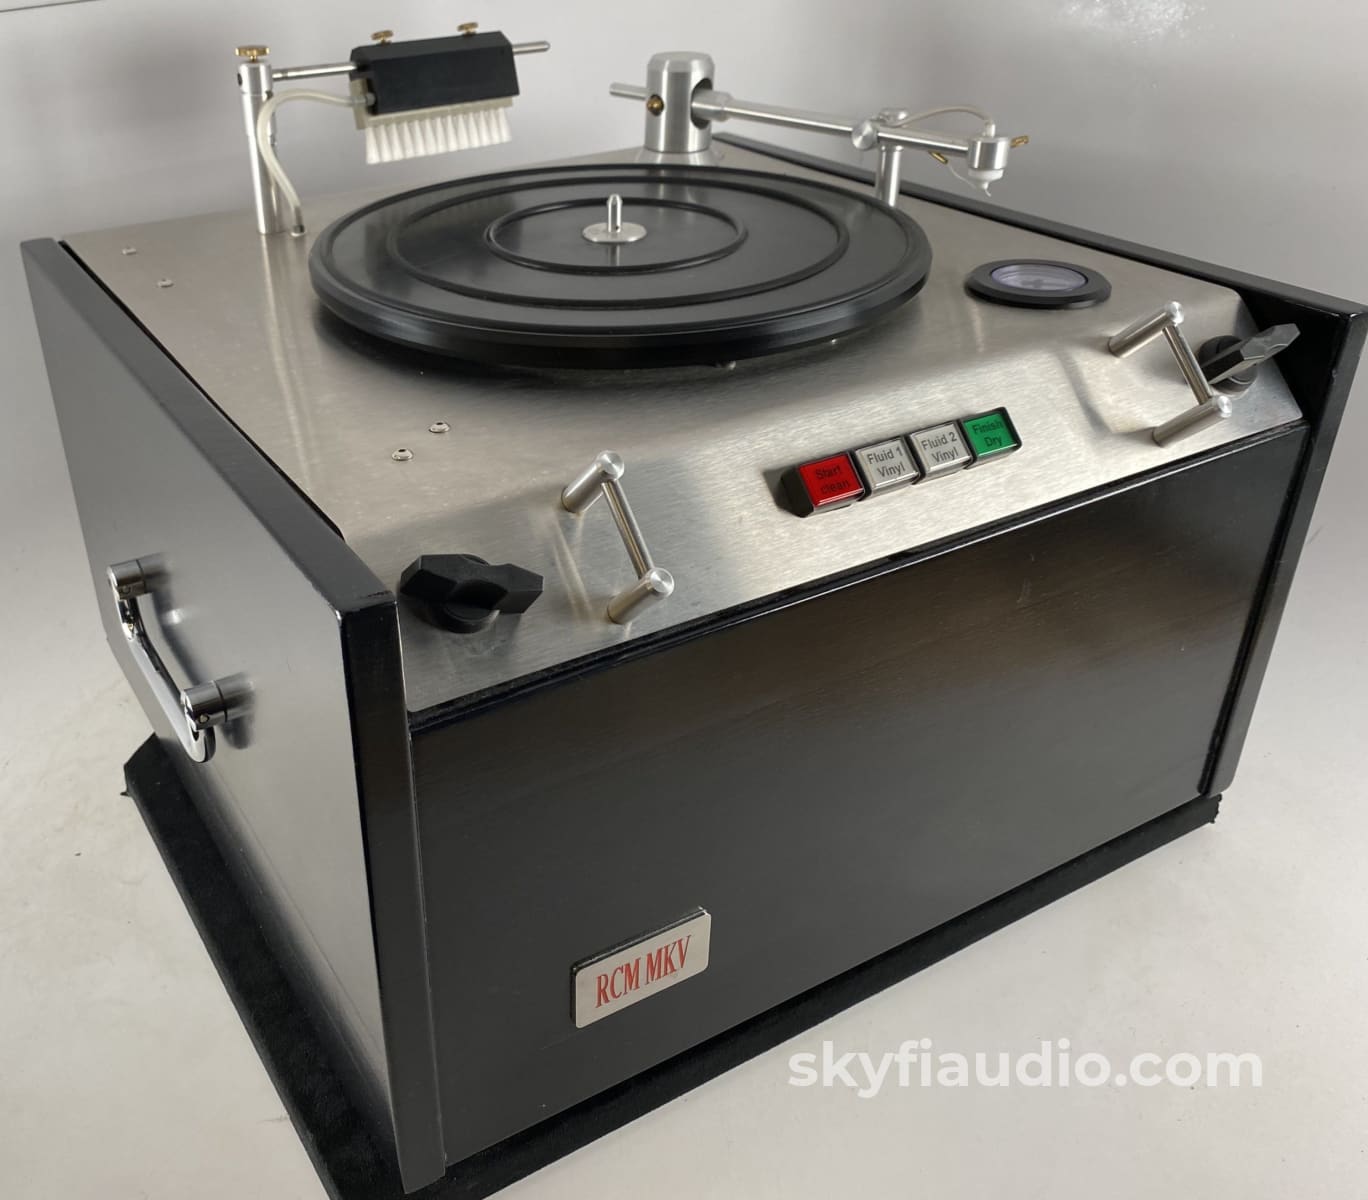 Odyssey Rcm Mkv Record Cleaning Machine Handmade In Germany Accessory